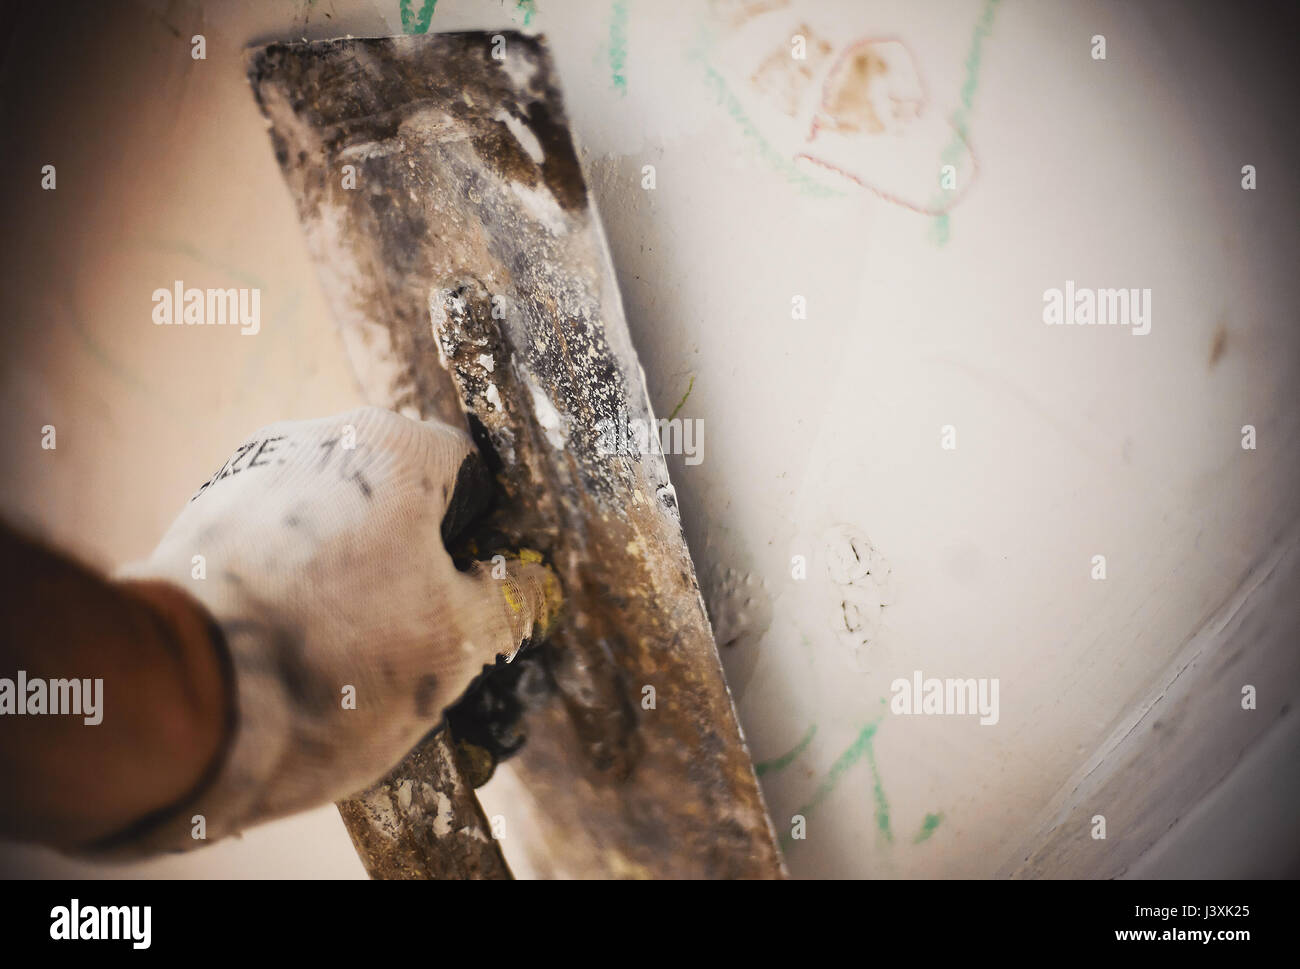 Closeup view on hand holding a tool renovating and old wall. Stock Photo